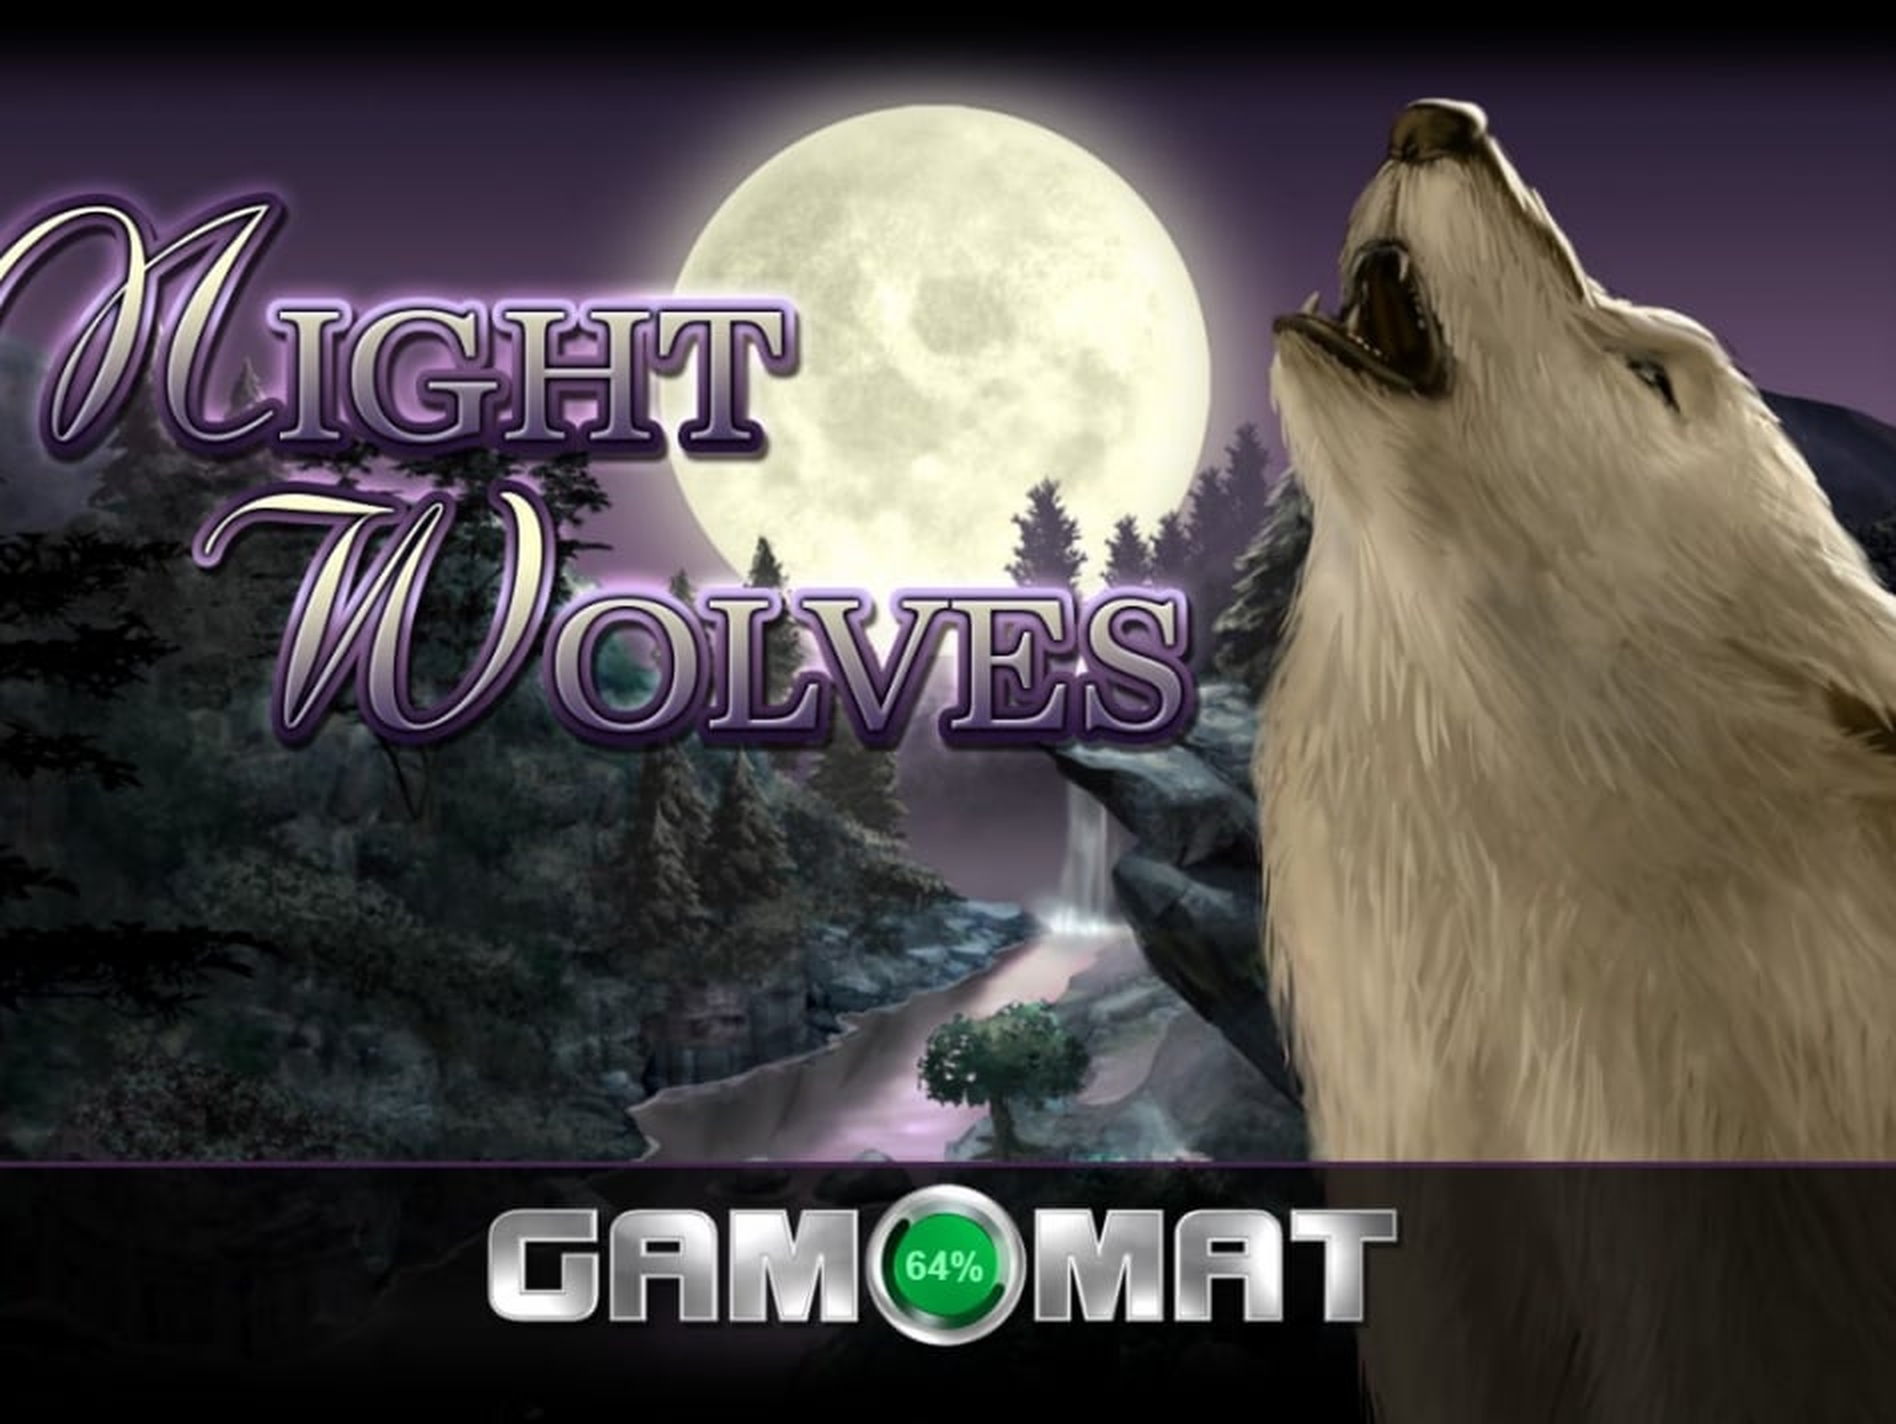 The Night Wolves Online Slot Demo Game by Gamomat